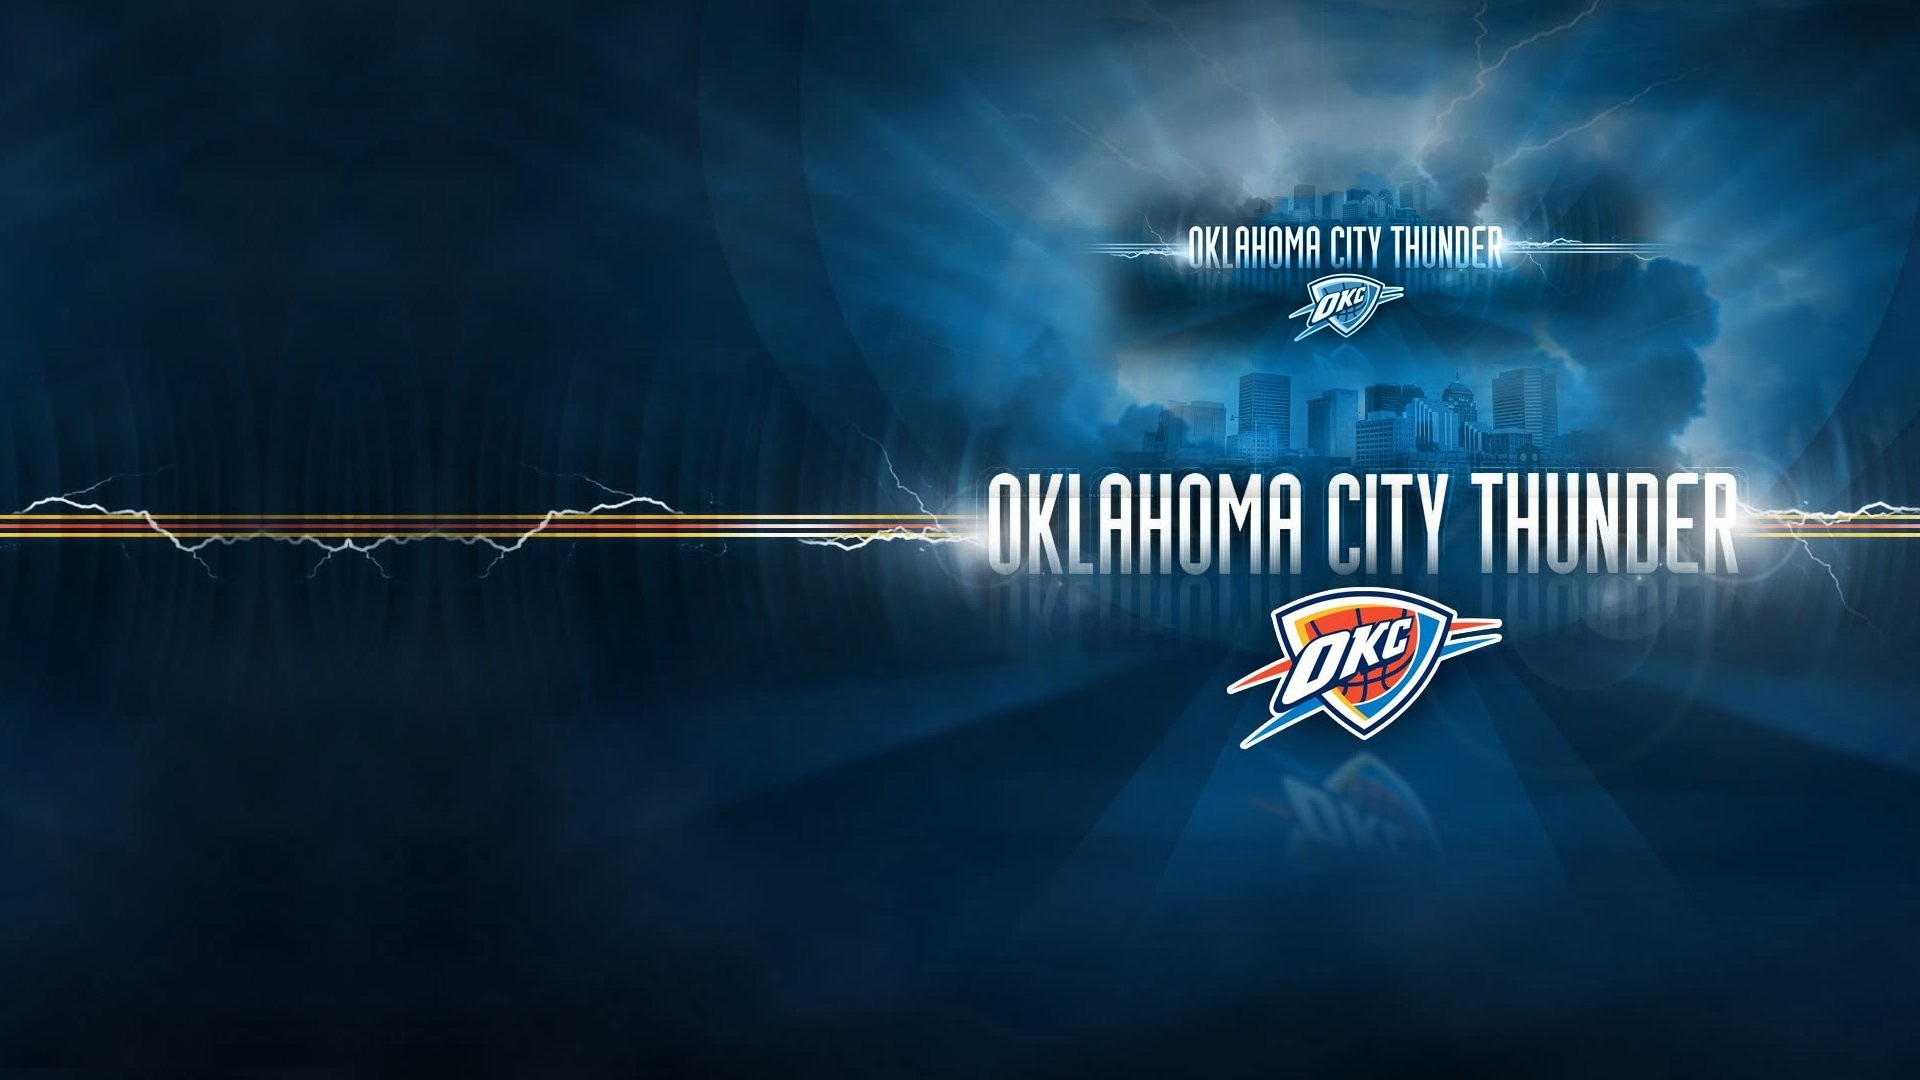 Oklahoma City Thunder For Mac Wallpaper with high-resolution 1920x1080 pixel. You can use this wallpaper for your Desktop Computer Backgrounds, Windows or Mac Screensavers, iPhone Lock screen, Tablet or Android and another Mobile Phone device